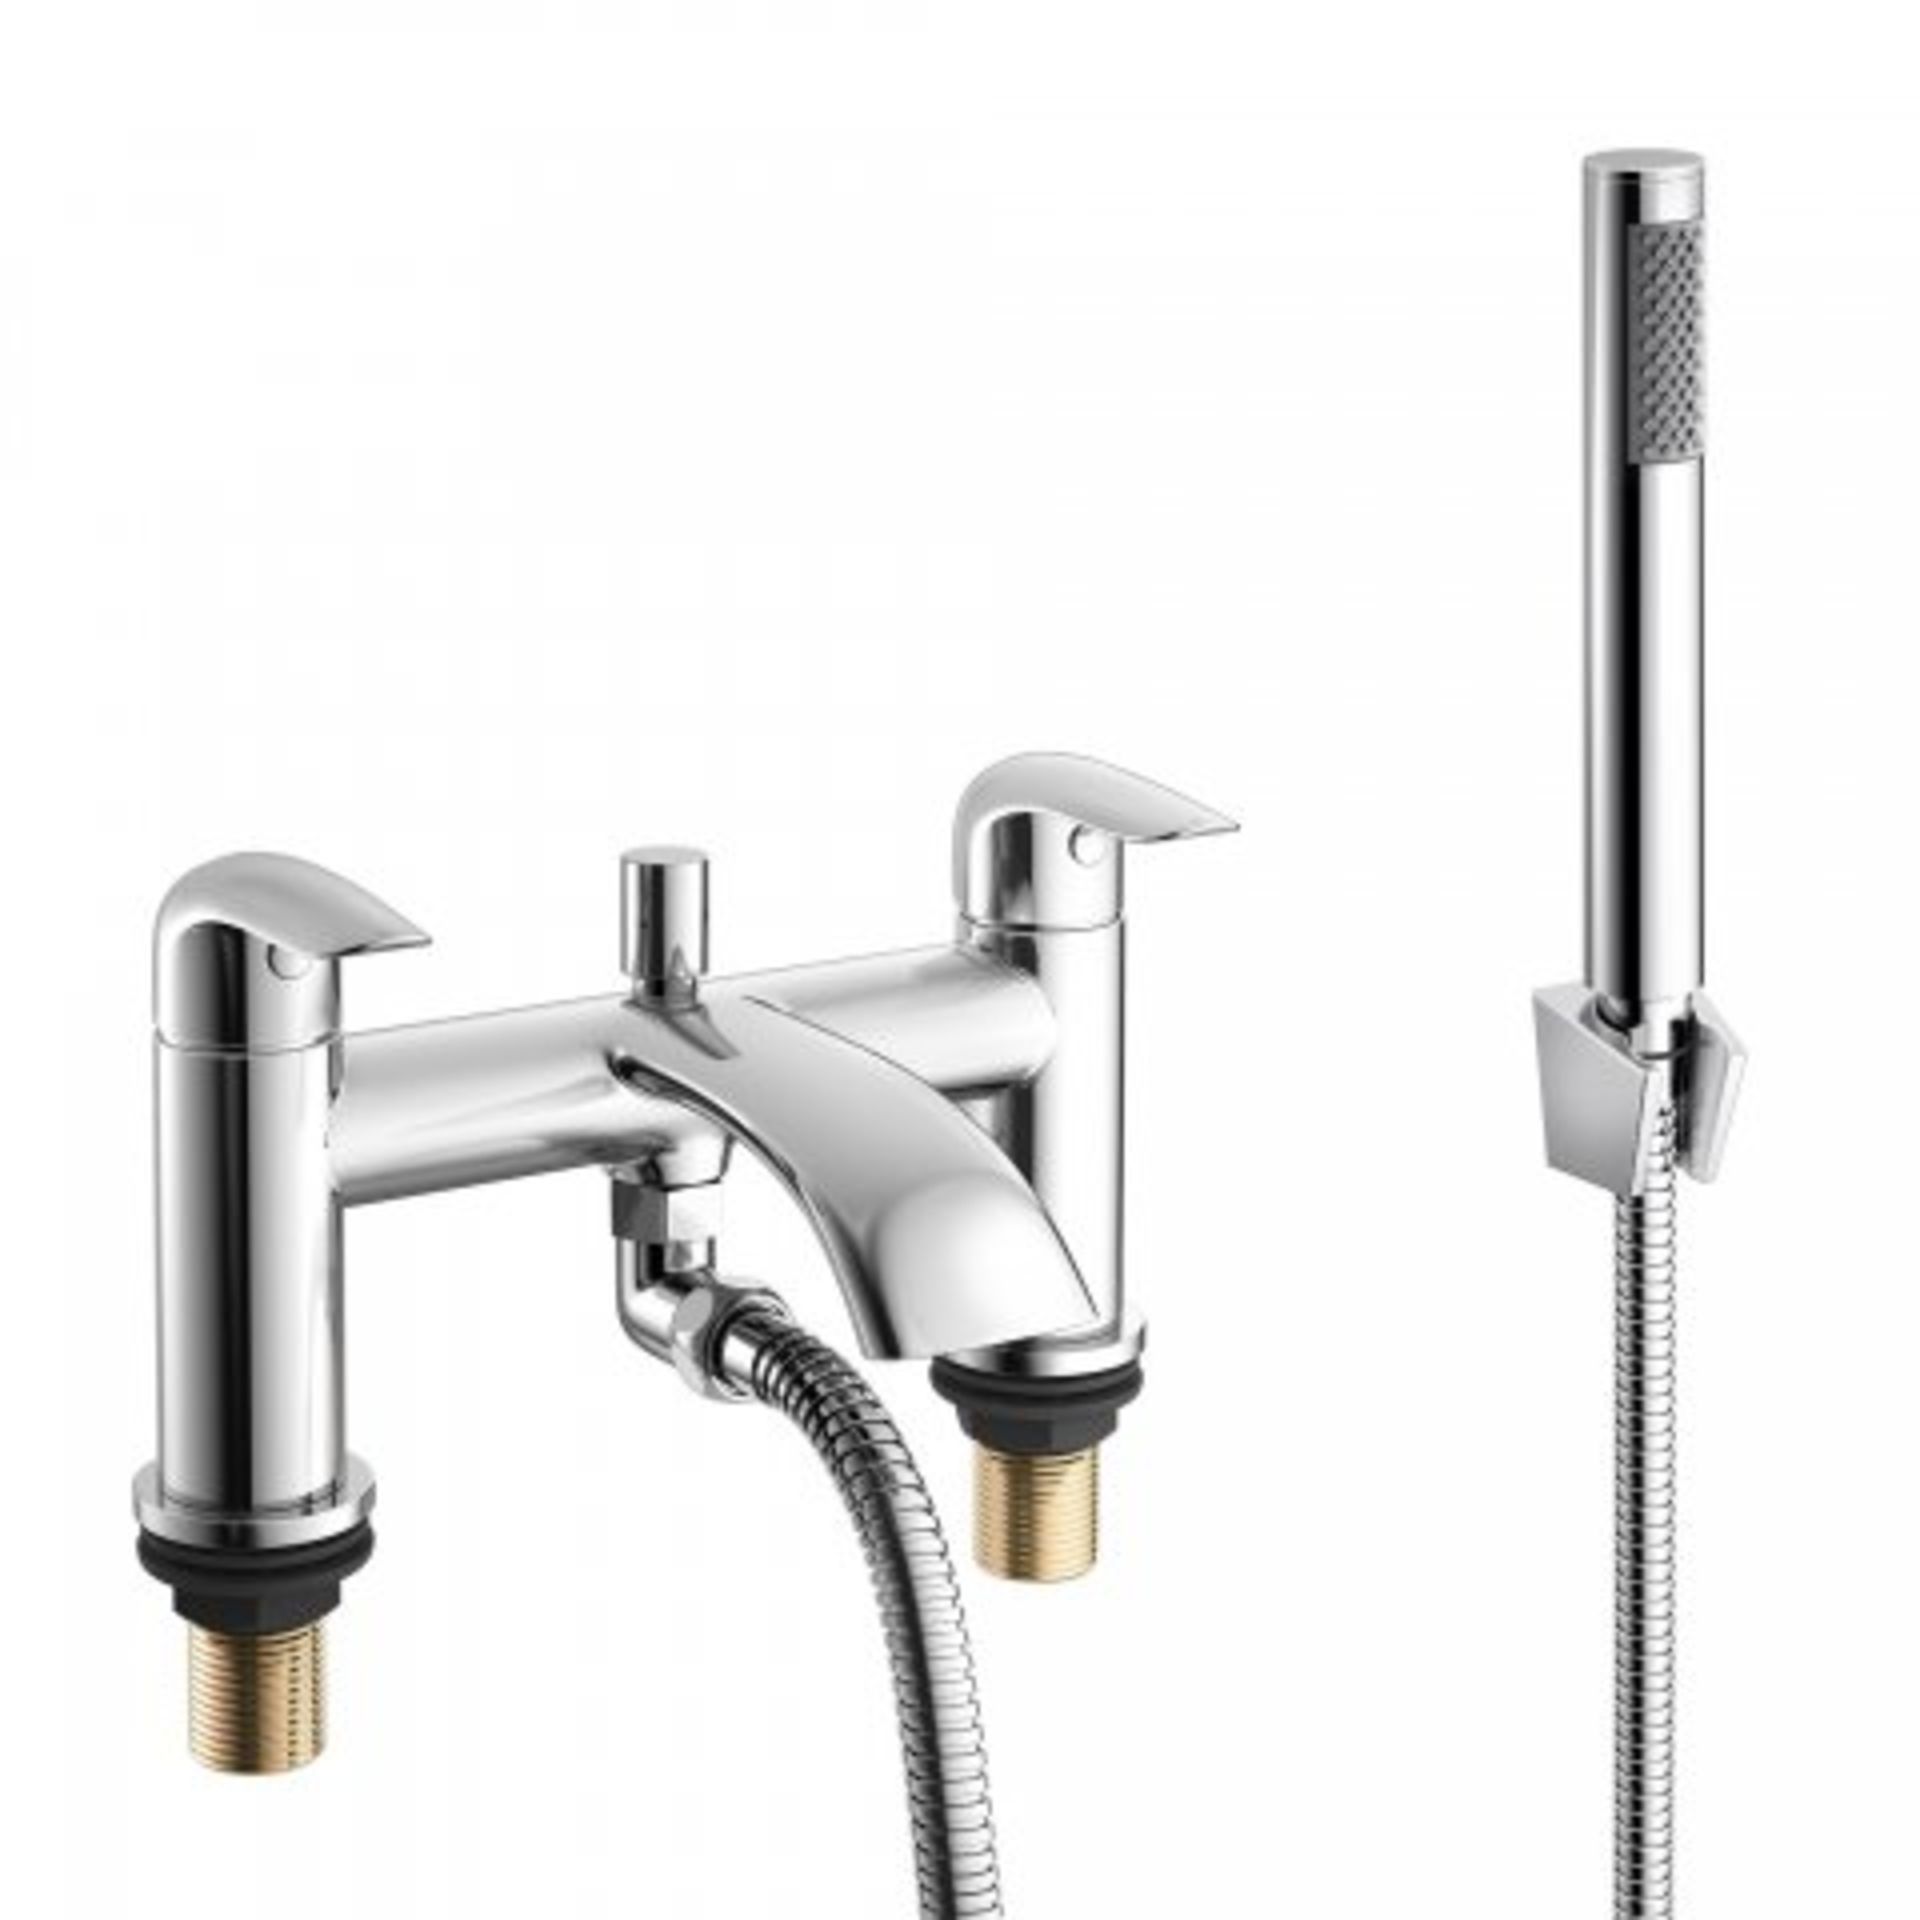 (SKU351) Melville Bath Mixer with Handheld Shower Head. RRP £174.99. The dramatically curved spout - Image 2 of 3